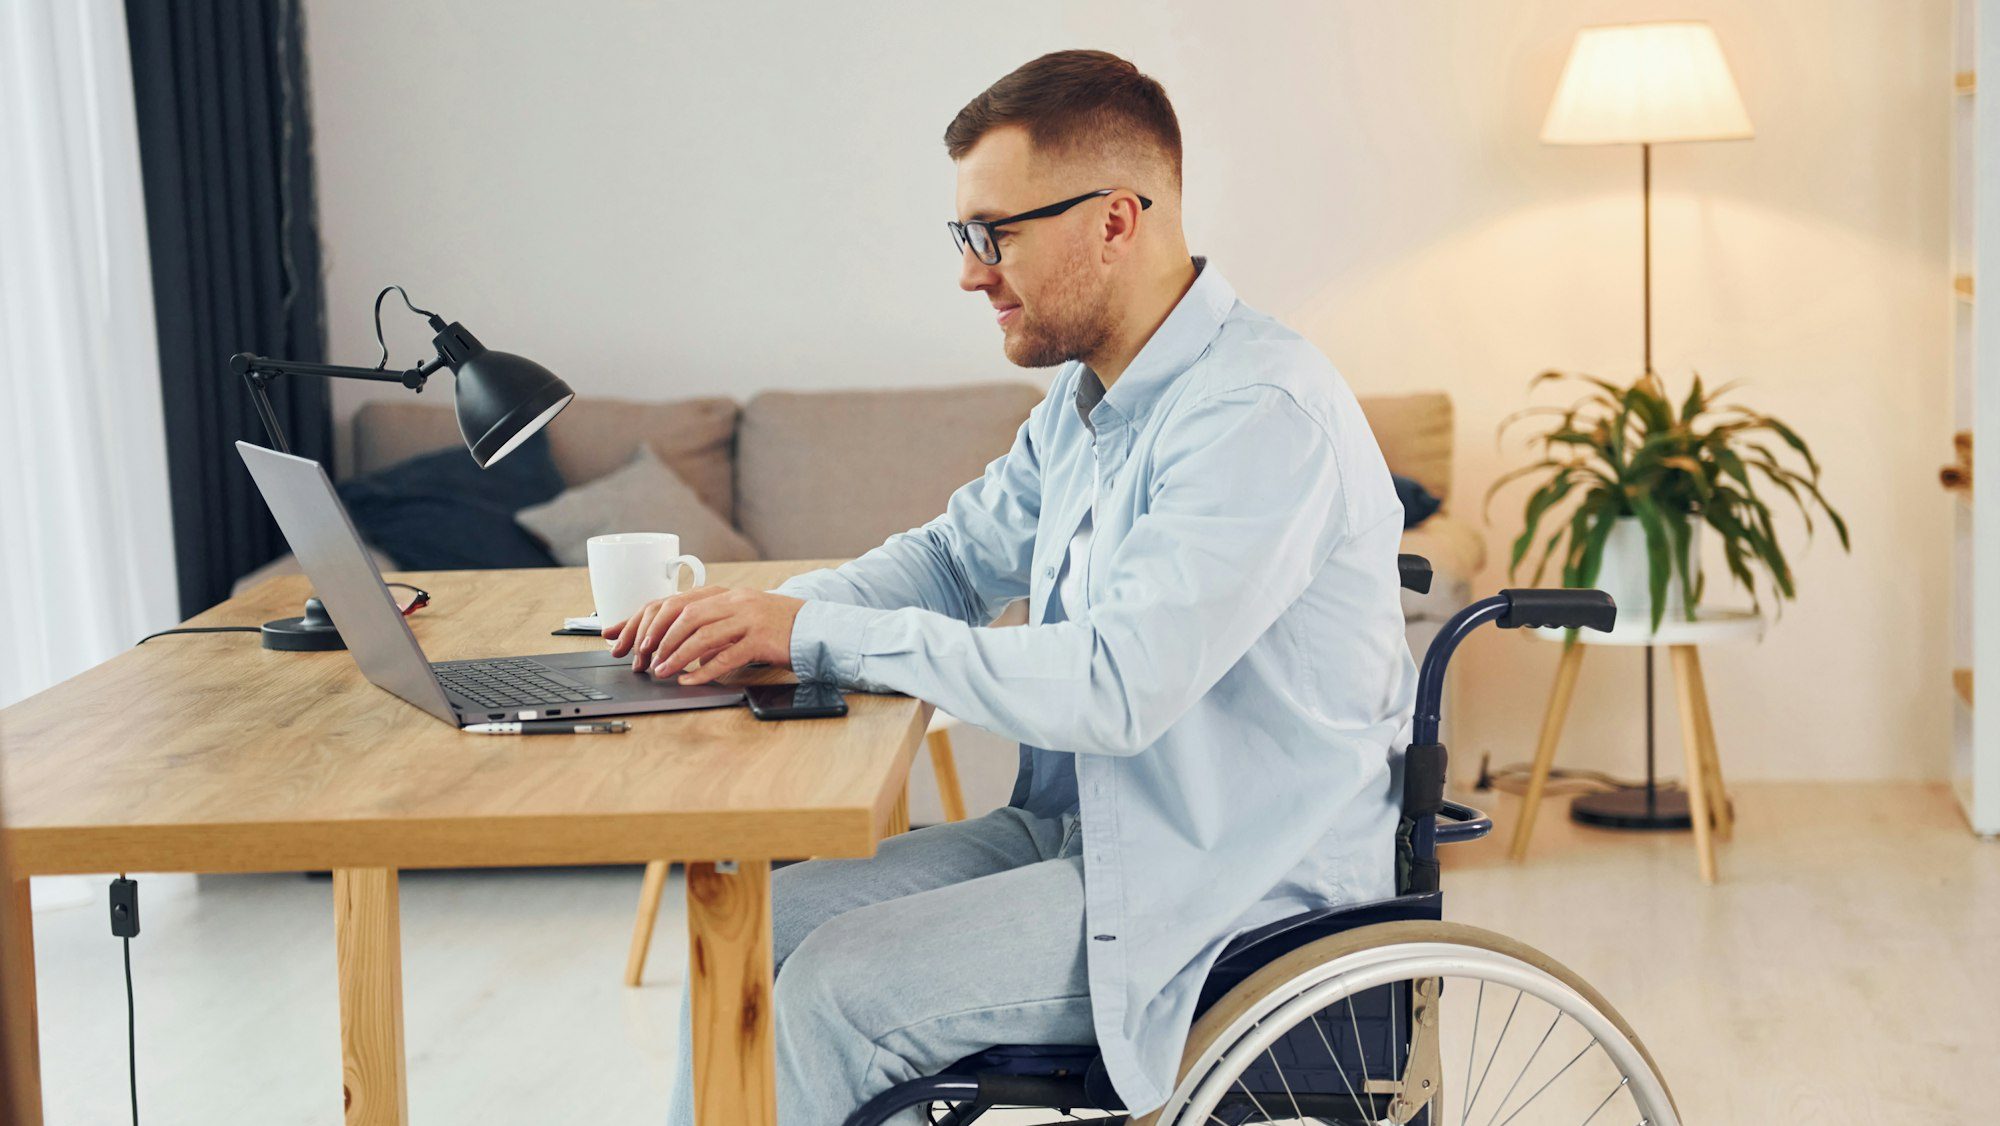 The Inclusion Of Disabled People In The Workplace